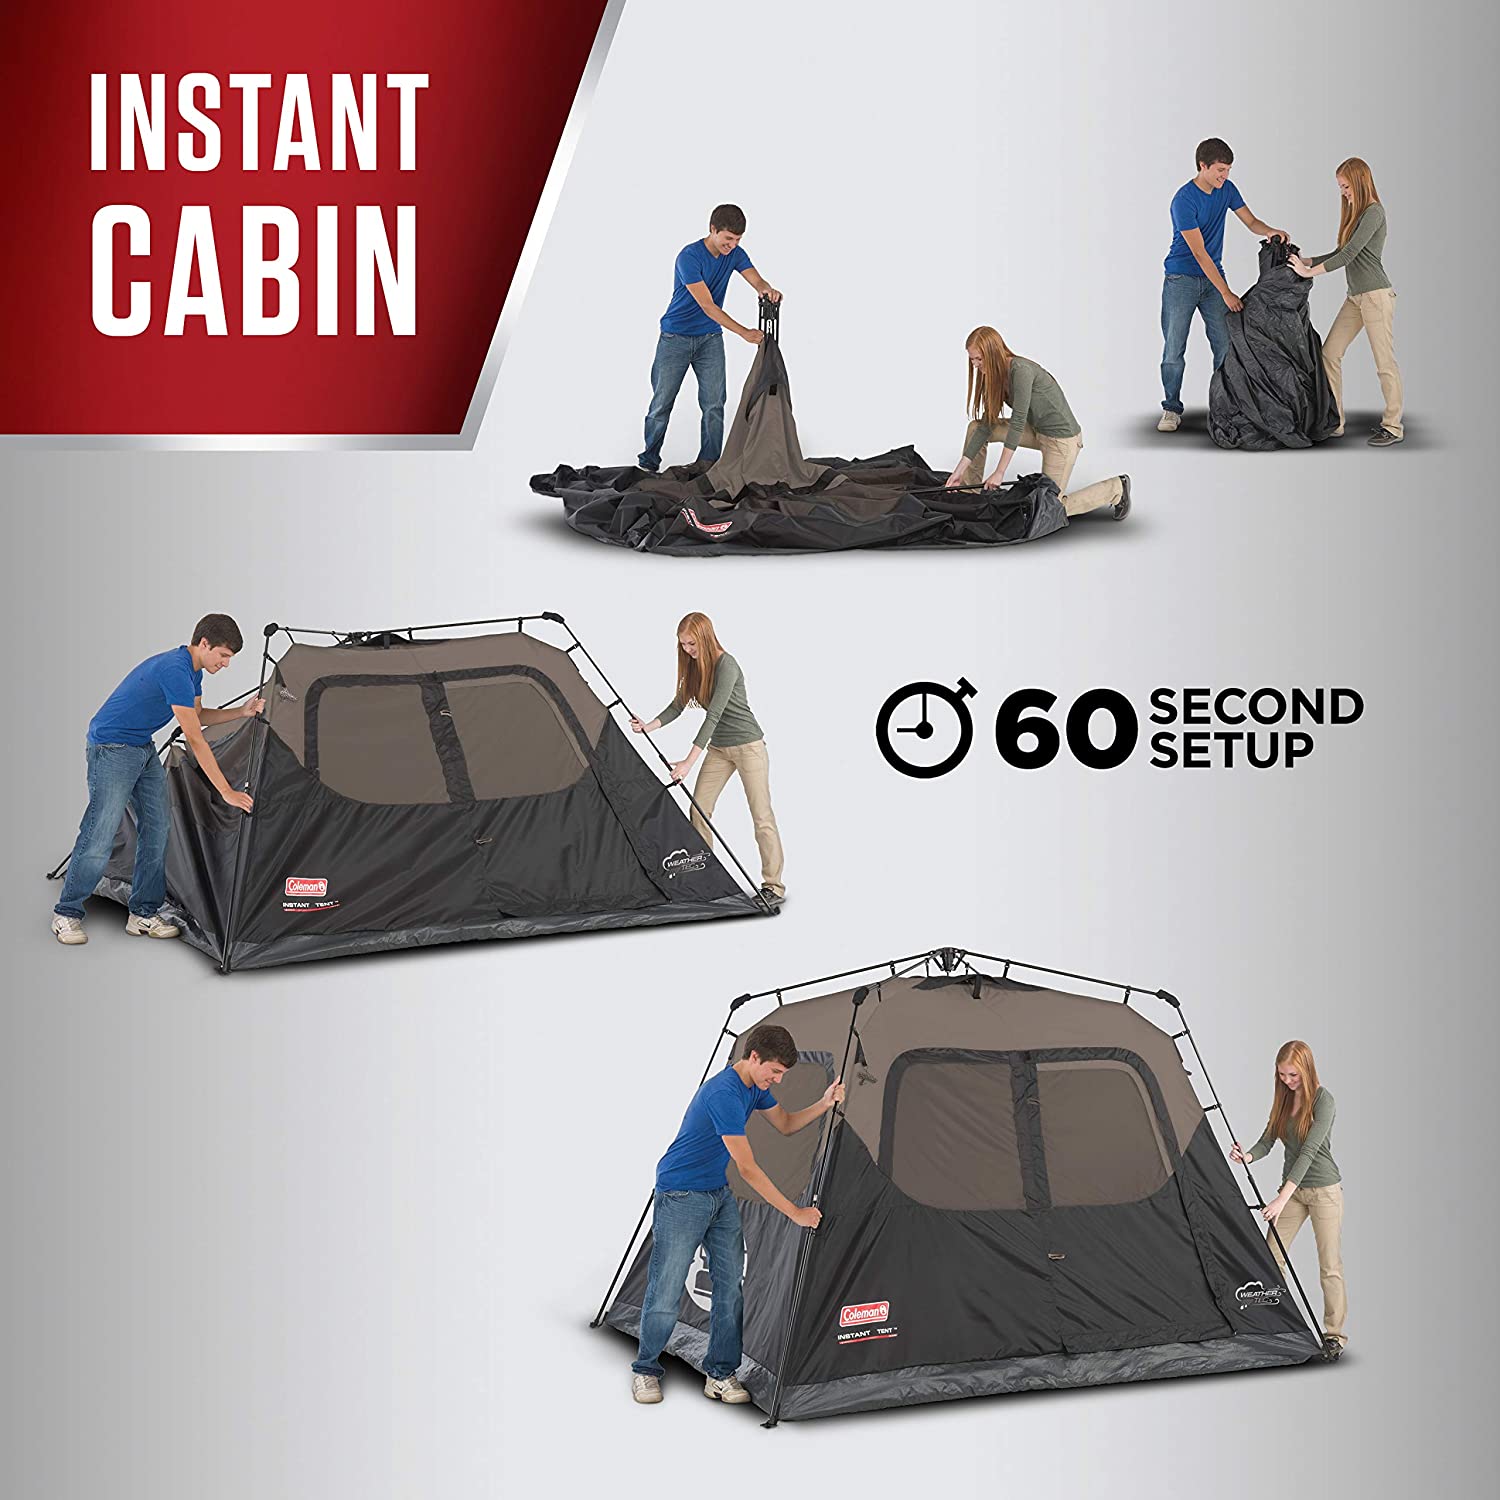 Coleman 6-Person Instant Cabin Tent